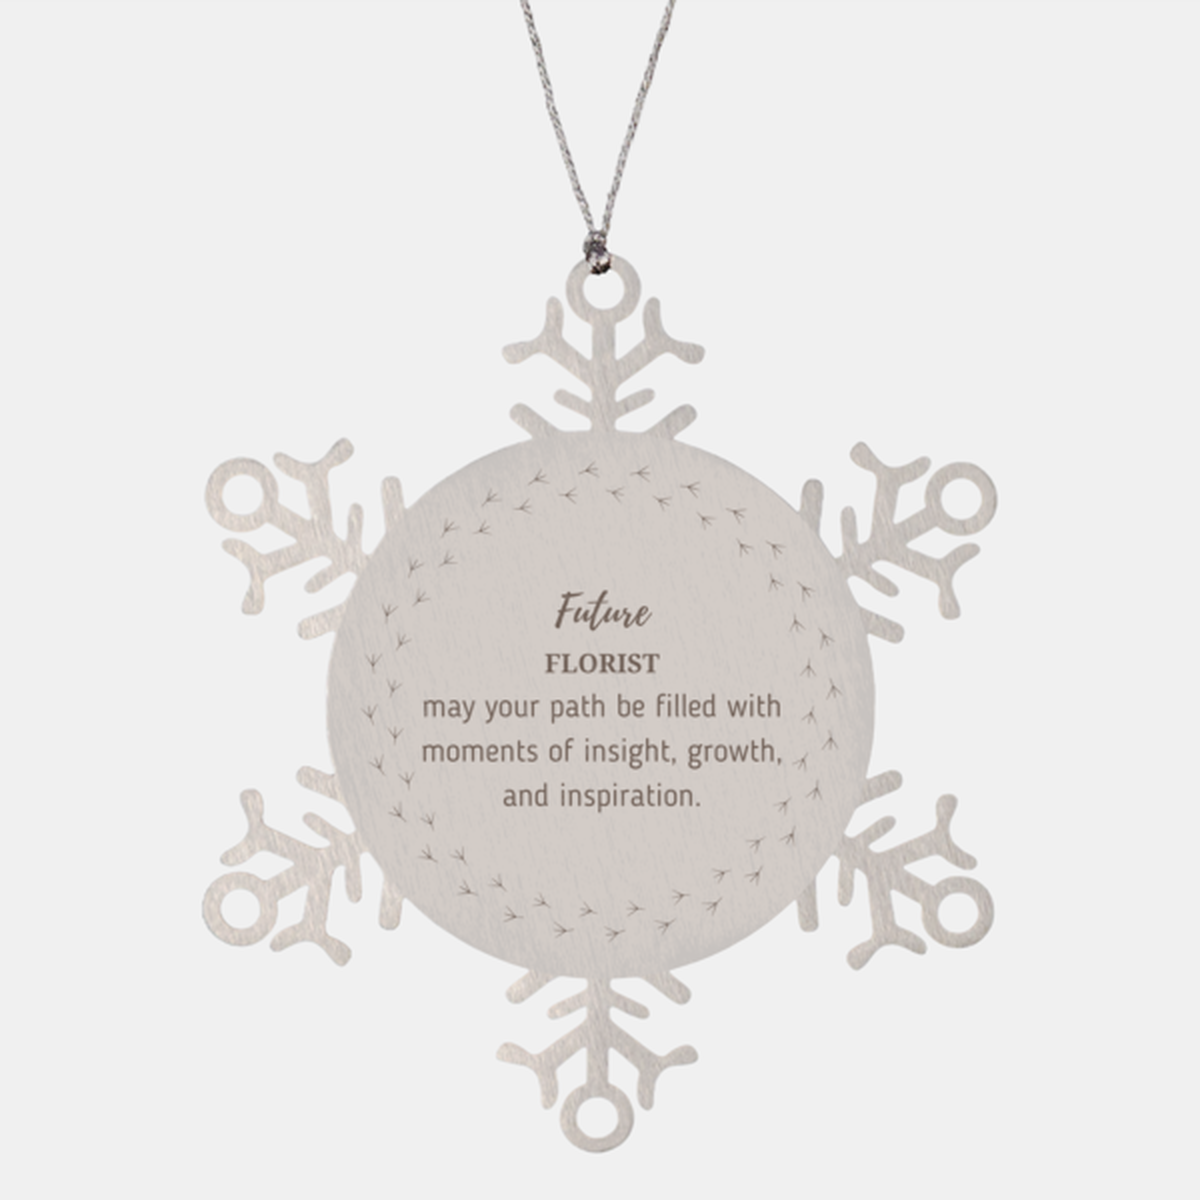 Future Florist Gifts, May your path be filled with moments of insight, Graduation Gifts for New Florist, Christmas Unique Snowflake Ornament For Men, Women, Friends